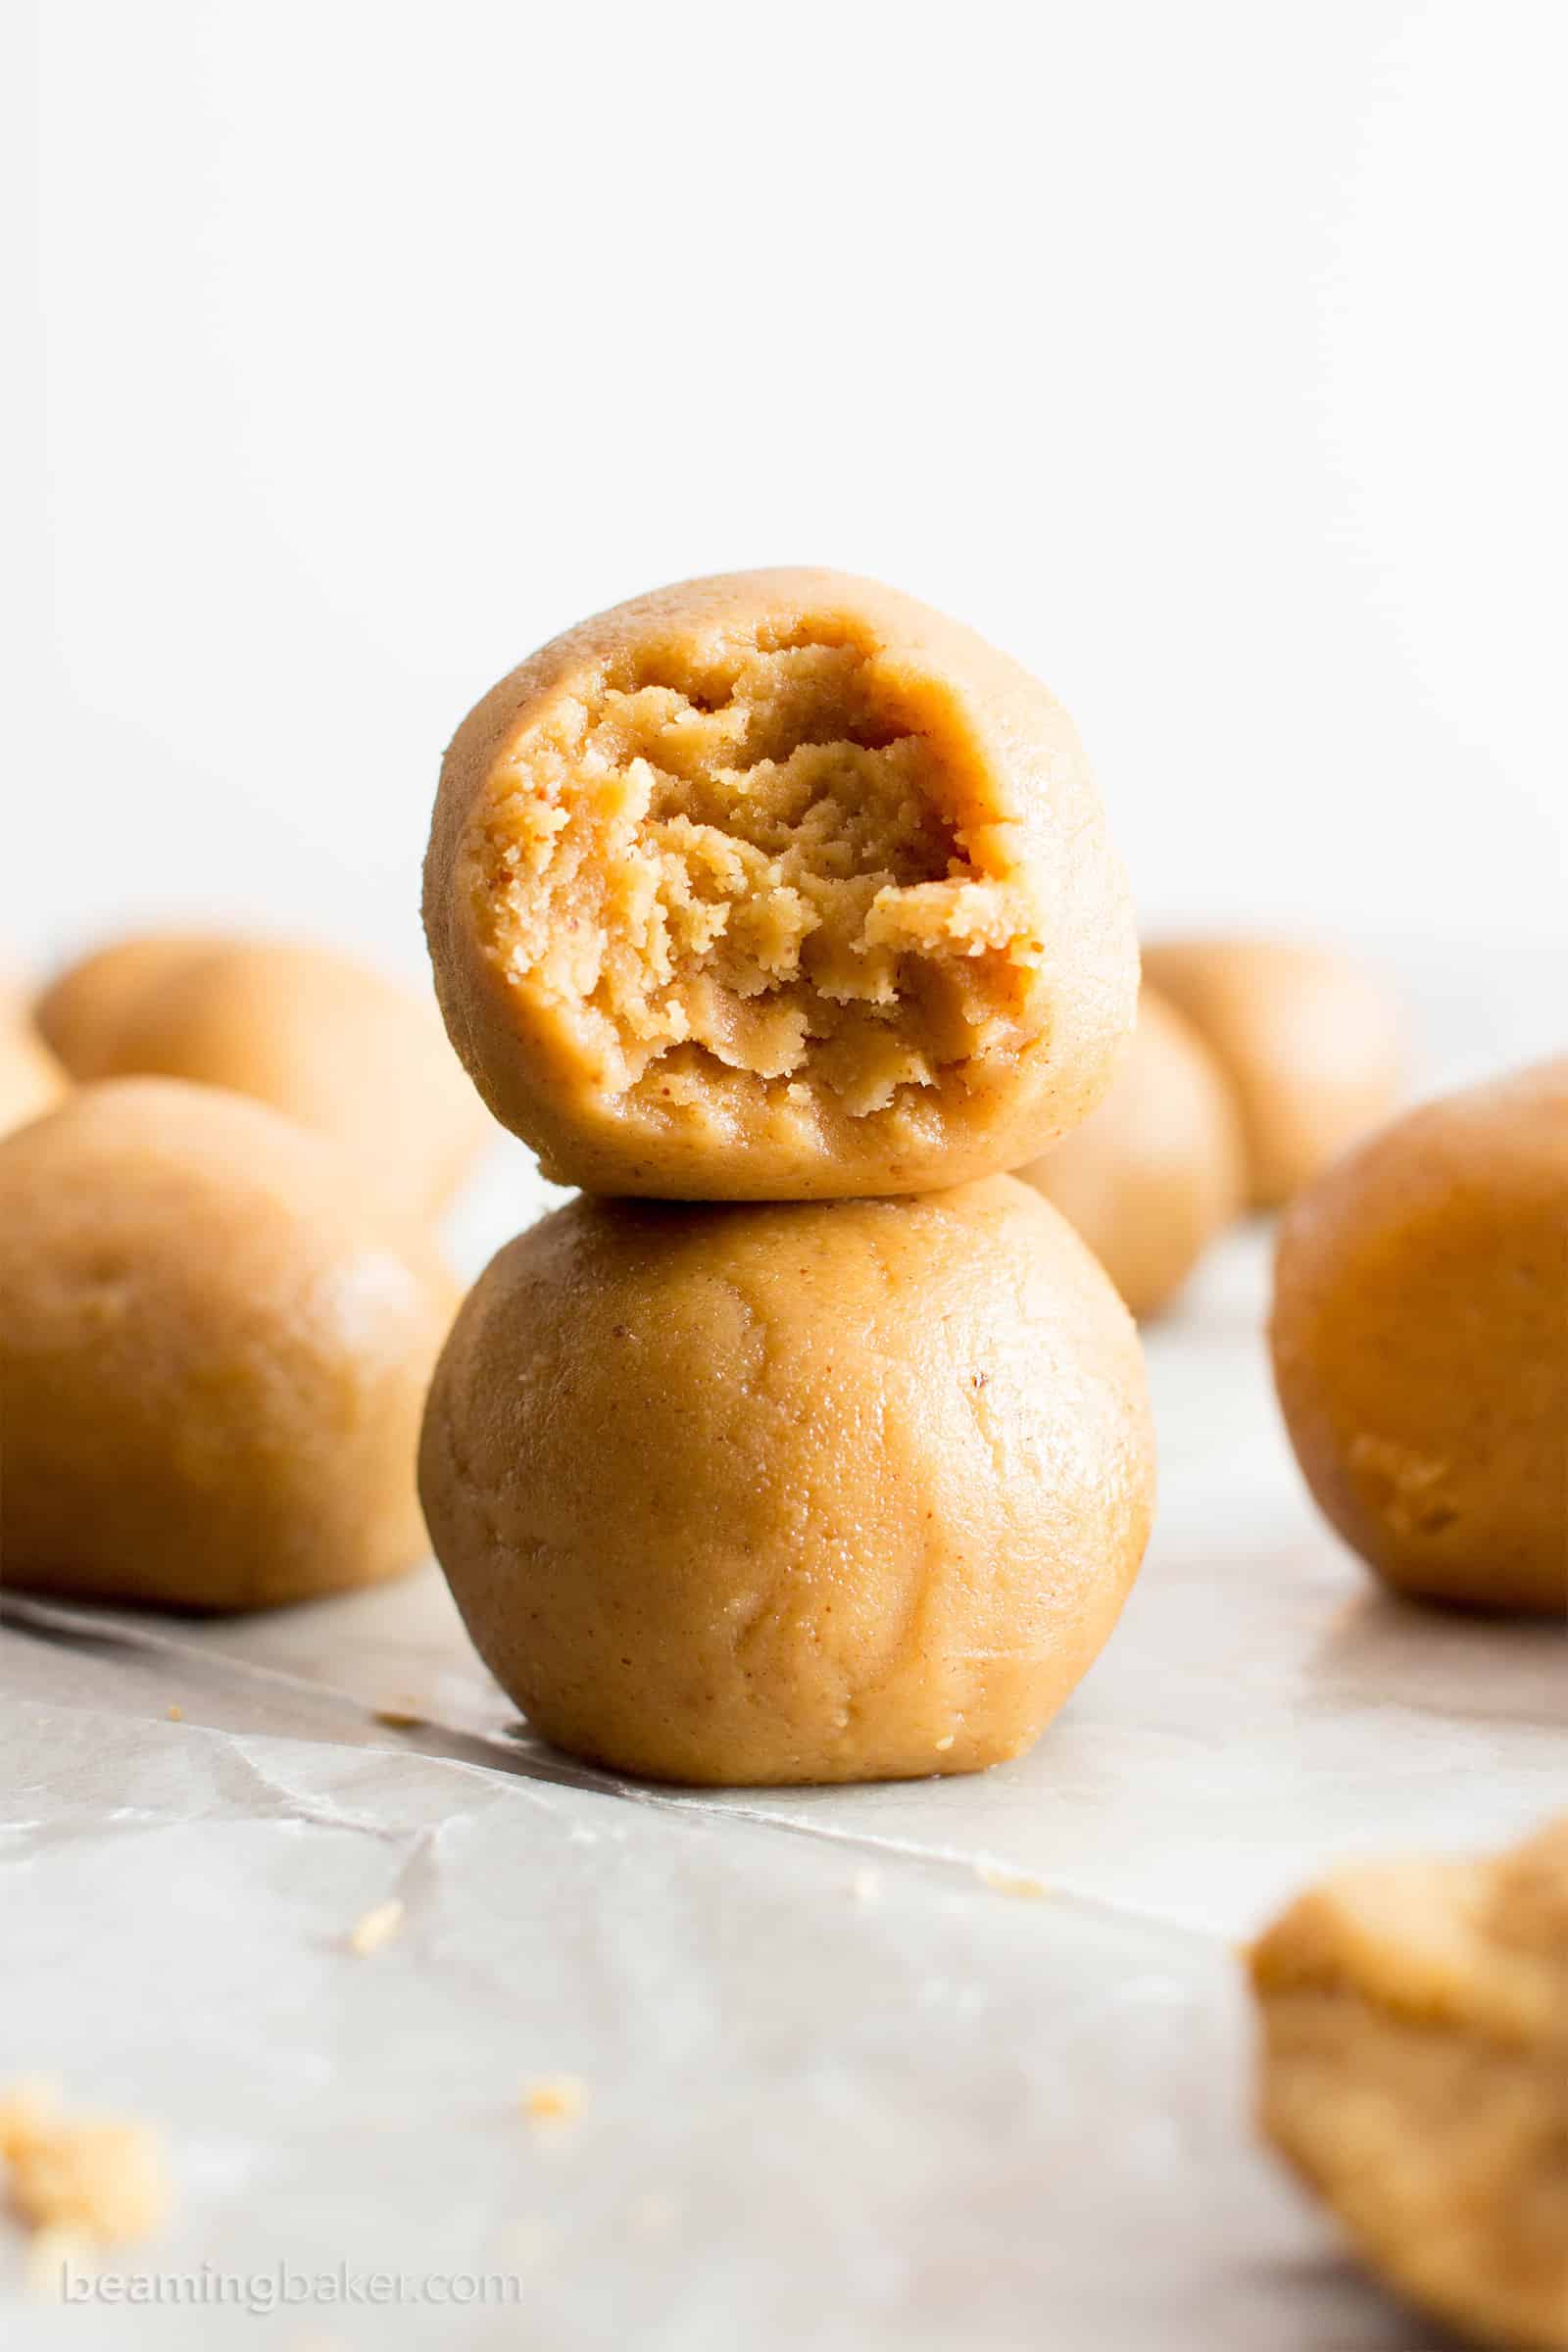 No Bake Peanut Butter Balls: just 3 ingredients for the best peanut butter bites—no bake, easy to make, simple & healthy ingredients. Soft and delicious no bake peanut butter balls. Vegan. #NoBake #PeanutButter #NoBakeBalls #NoBakeBites #EnergyBites #EnergyBalls | Recipe at BeamingBaker.com